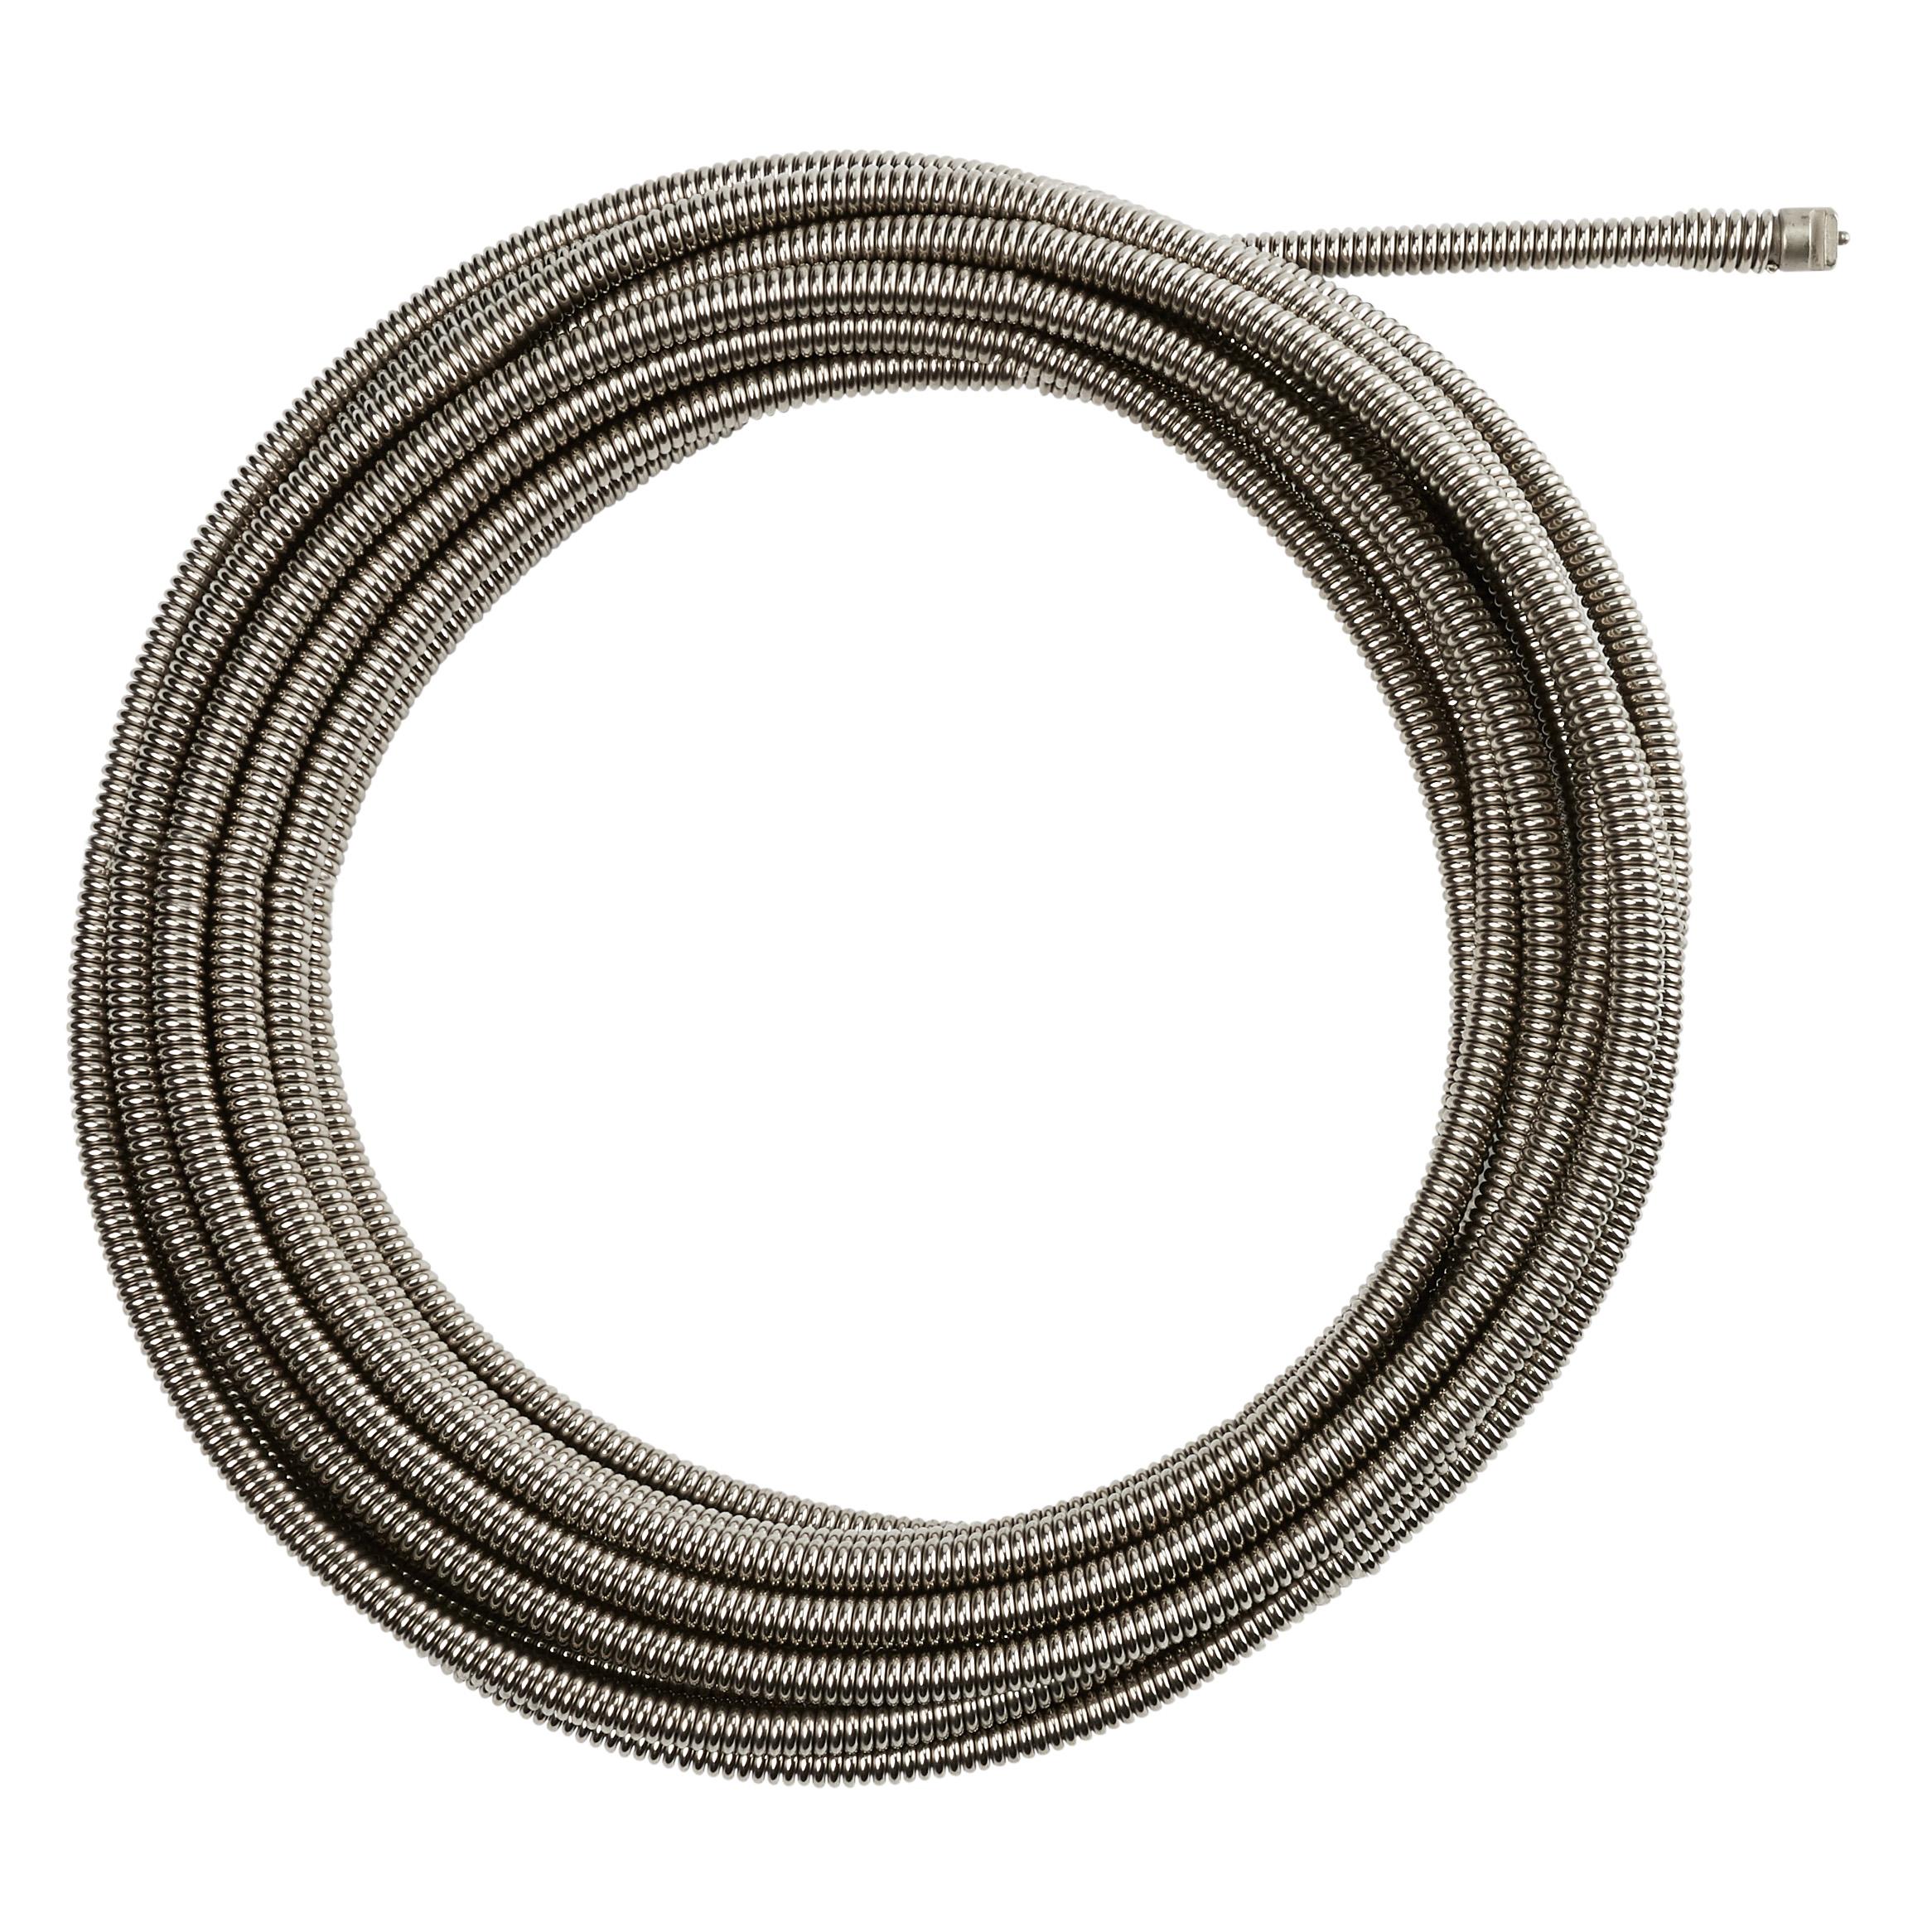 Milwaukee® 48-53-2562 Inner Core Drop Head Drain Cleaning Cable, 5/16 in, Steel, For Use With Drain Cleaning Machines, 1-1/4 to 2-1/2 in Drain Line